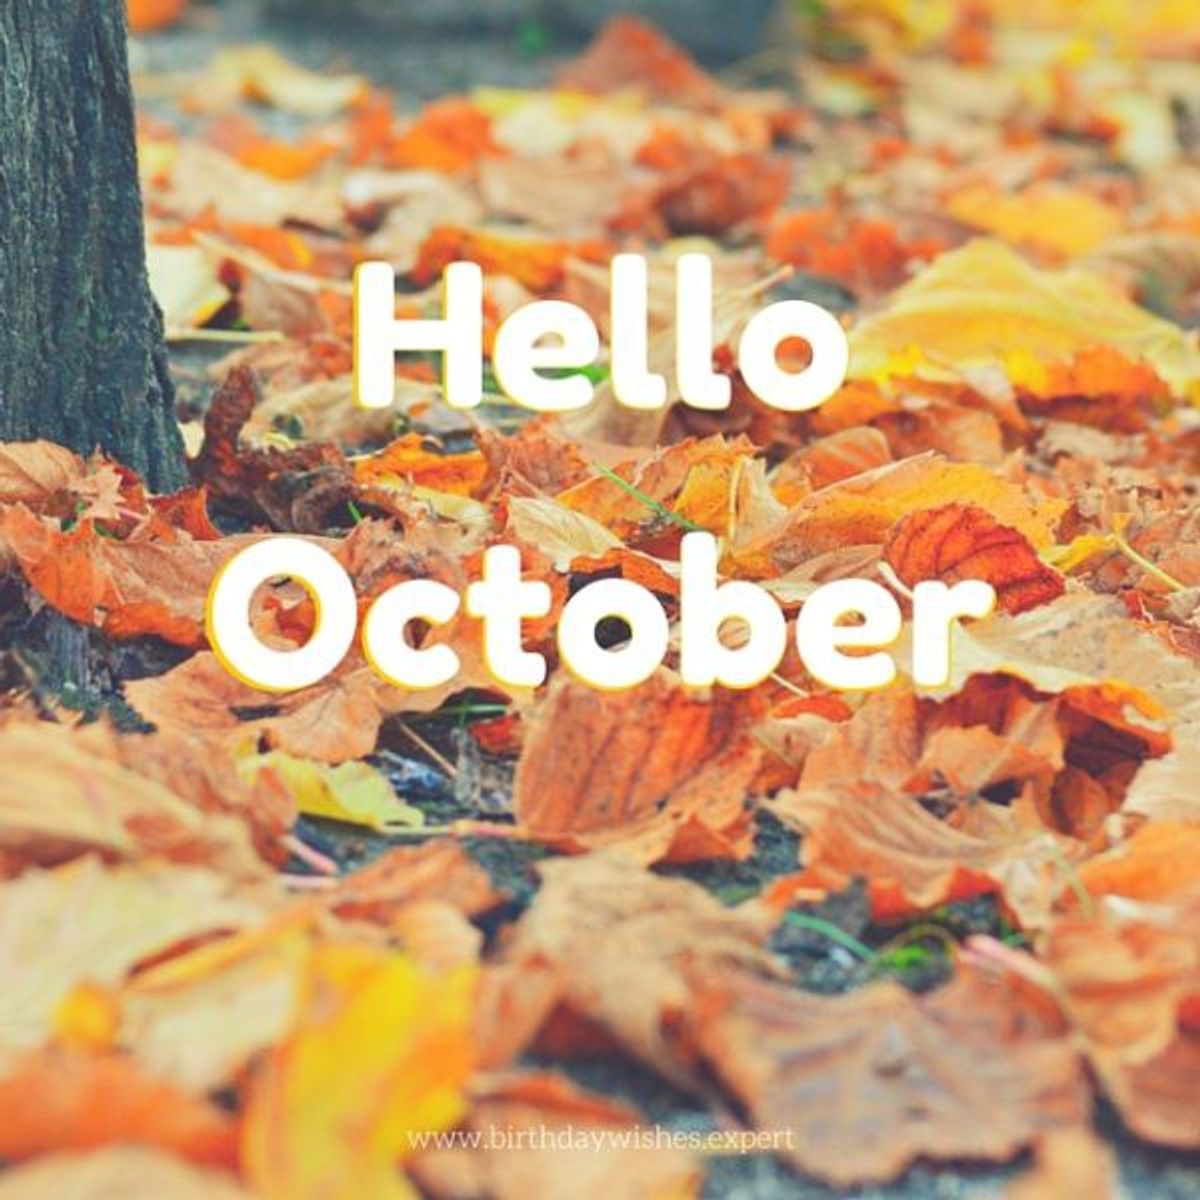 5 Reasons October Is The Greatest Month There Is